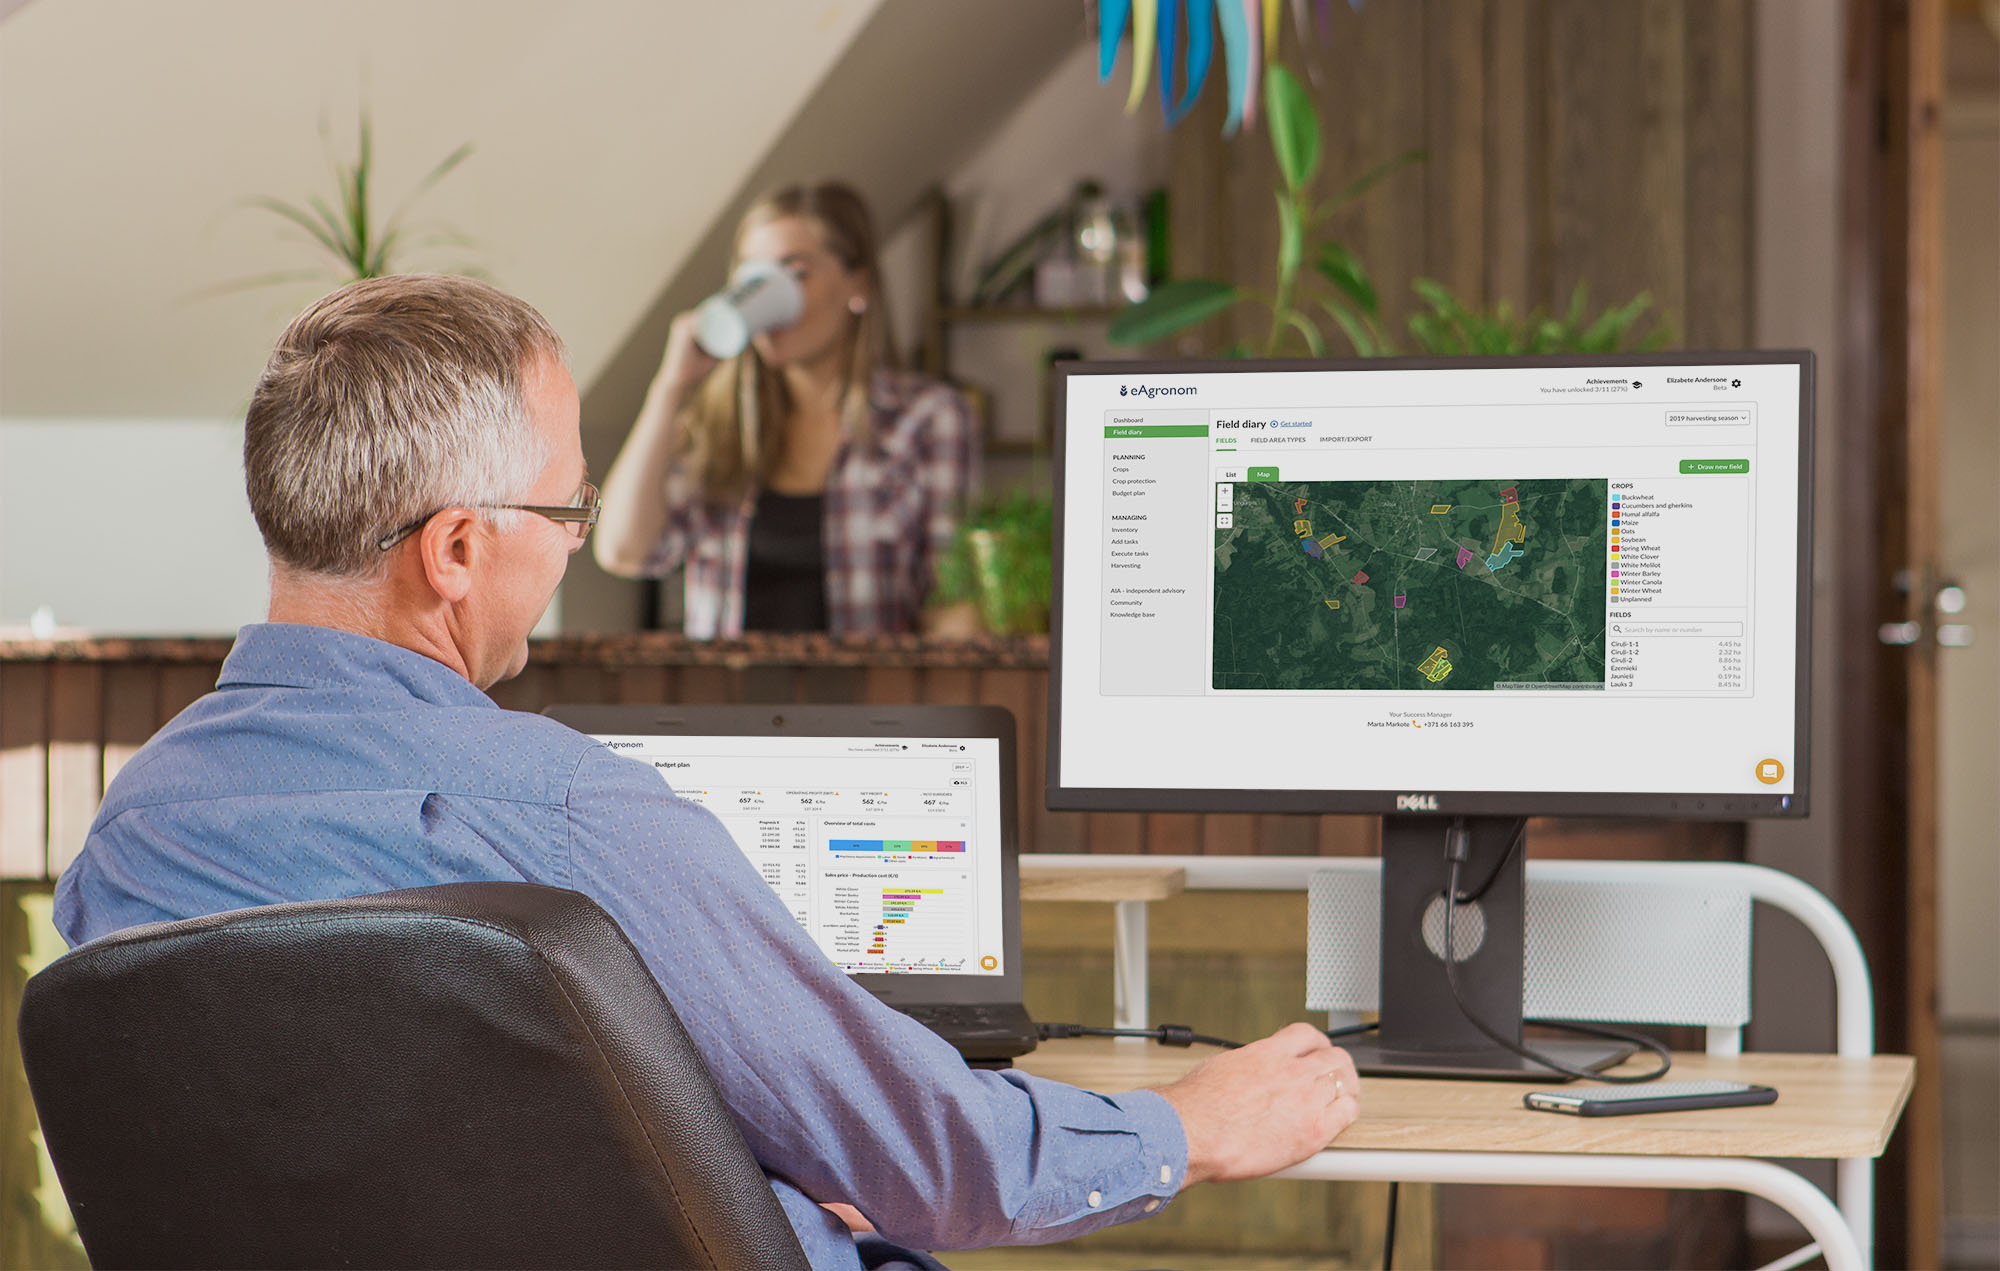 A complete cloud-based farm management platform for grain growers and agronomists